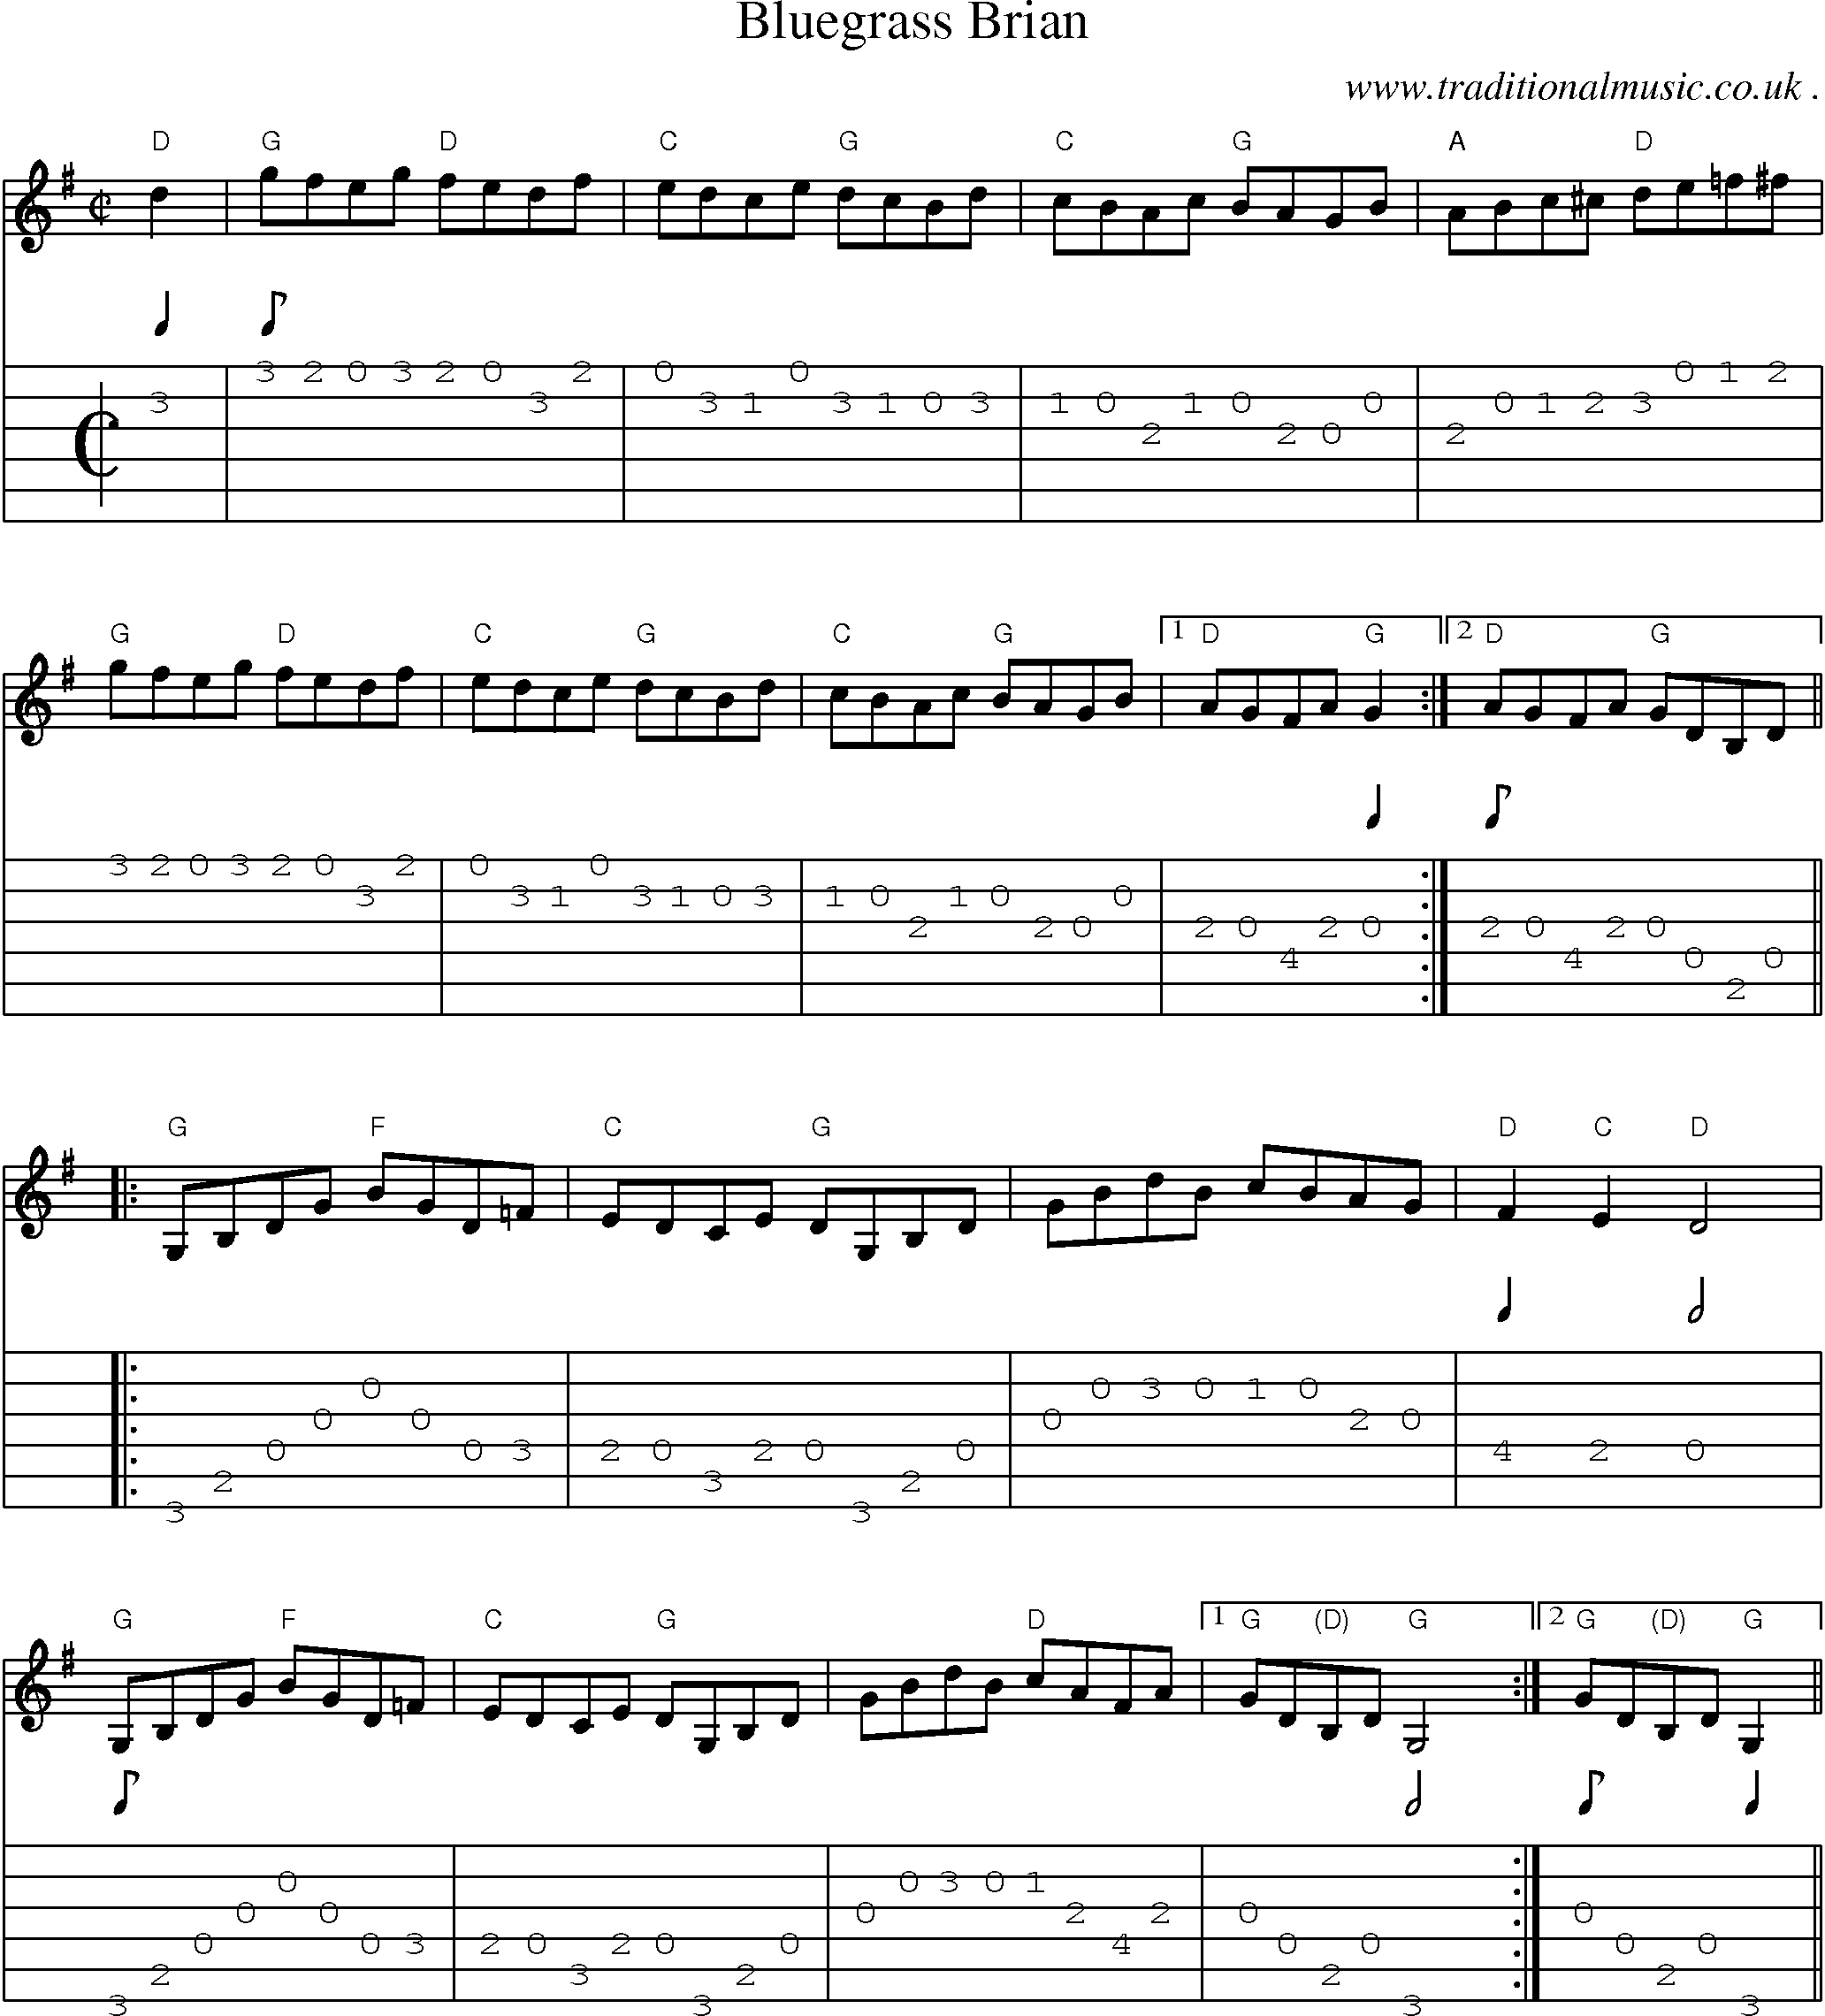 Music Score and Guitar Tabs for Bluegrass Brian